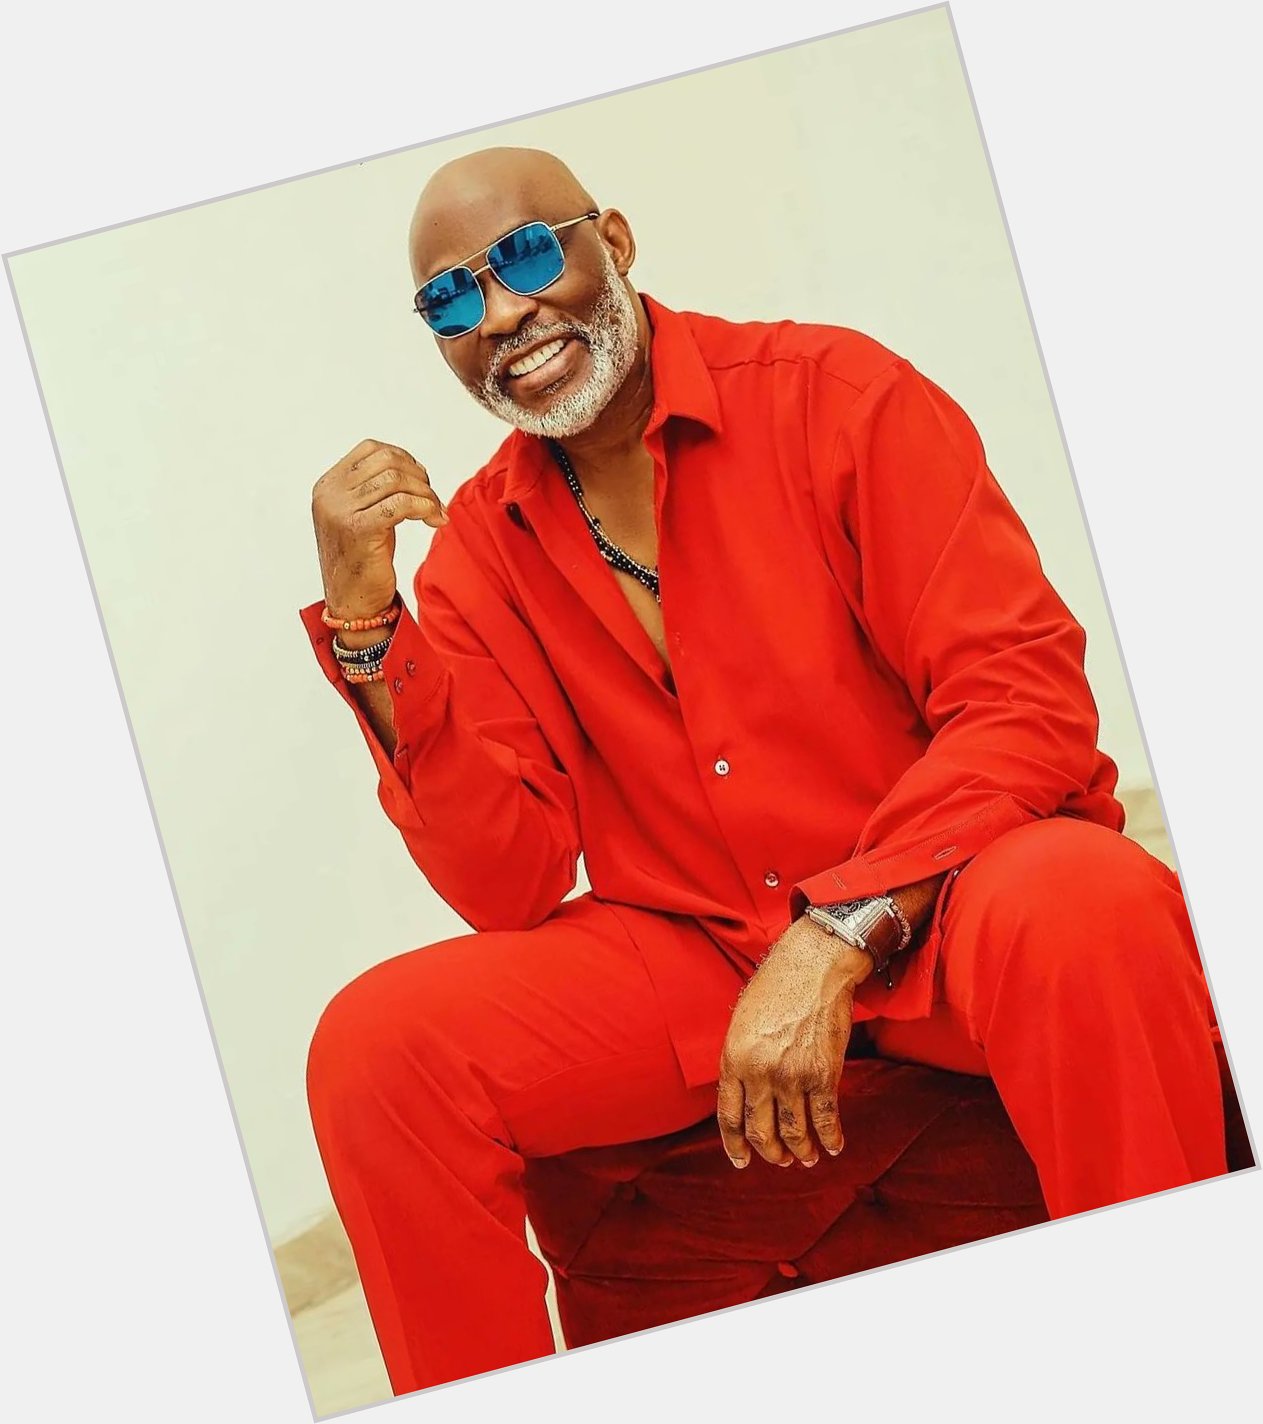 Happy birthday to Nigerian actor Richard Mofe-Damijo   62 years and attractive!

Stay blessed! 